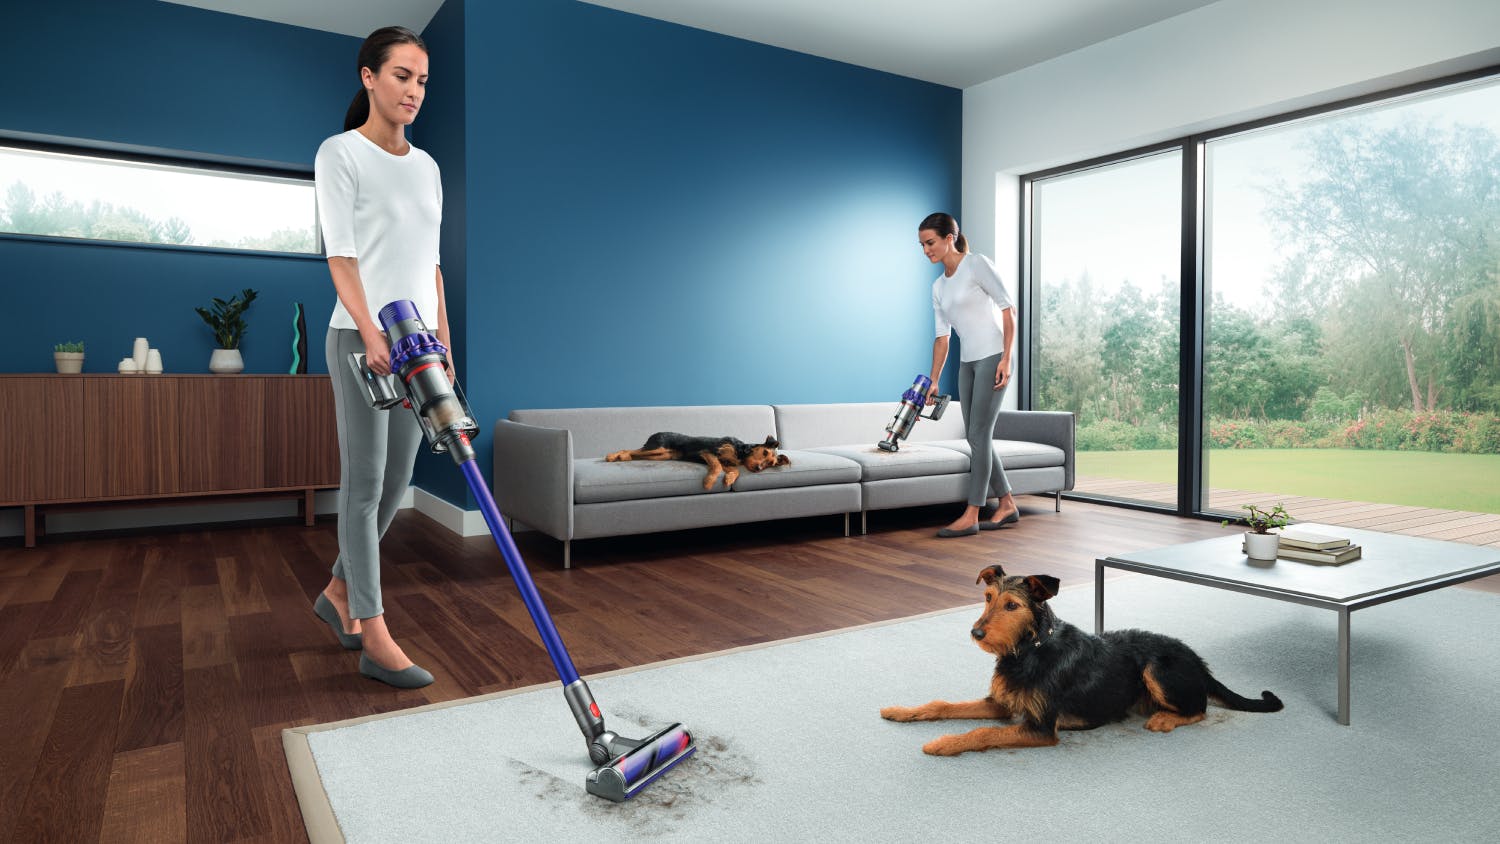 Dyson V10 Cyclone Handstick Vacuum Cleaner